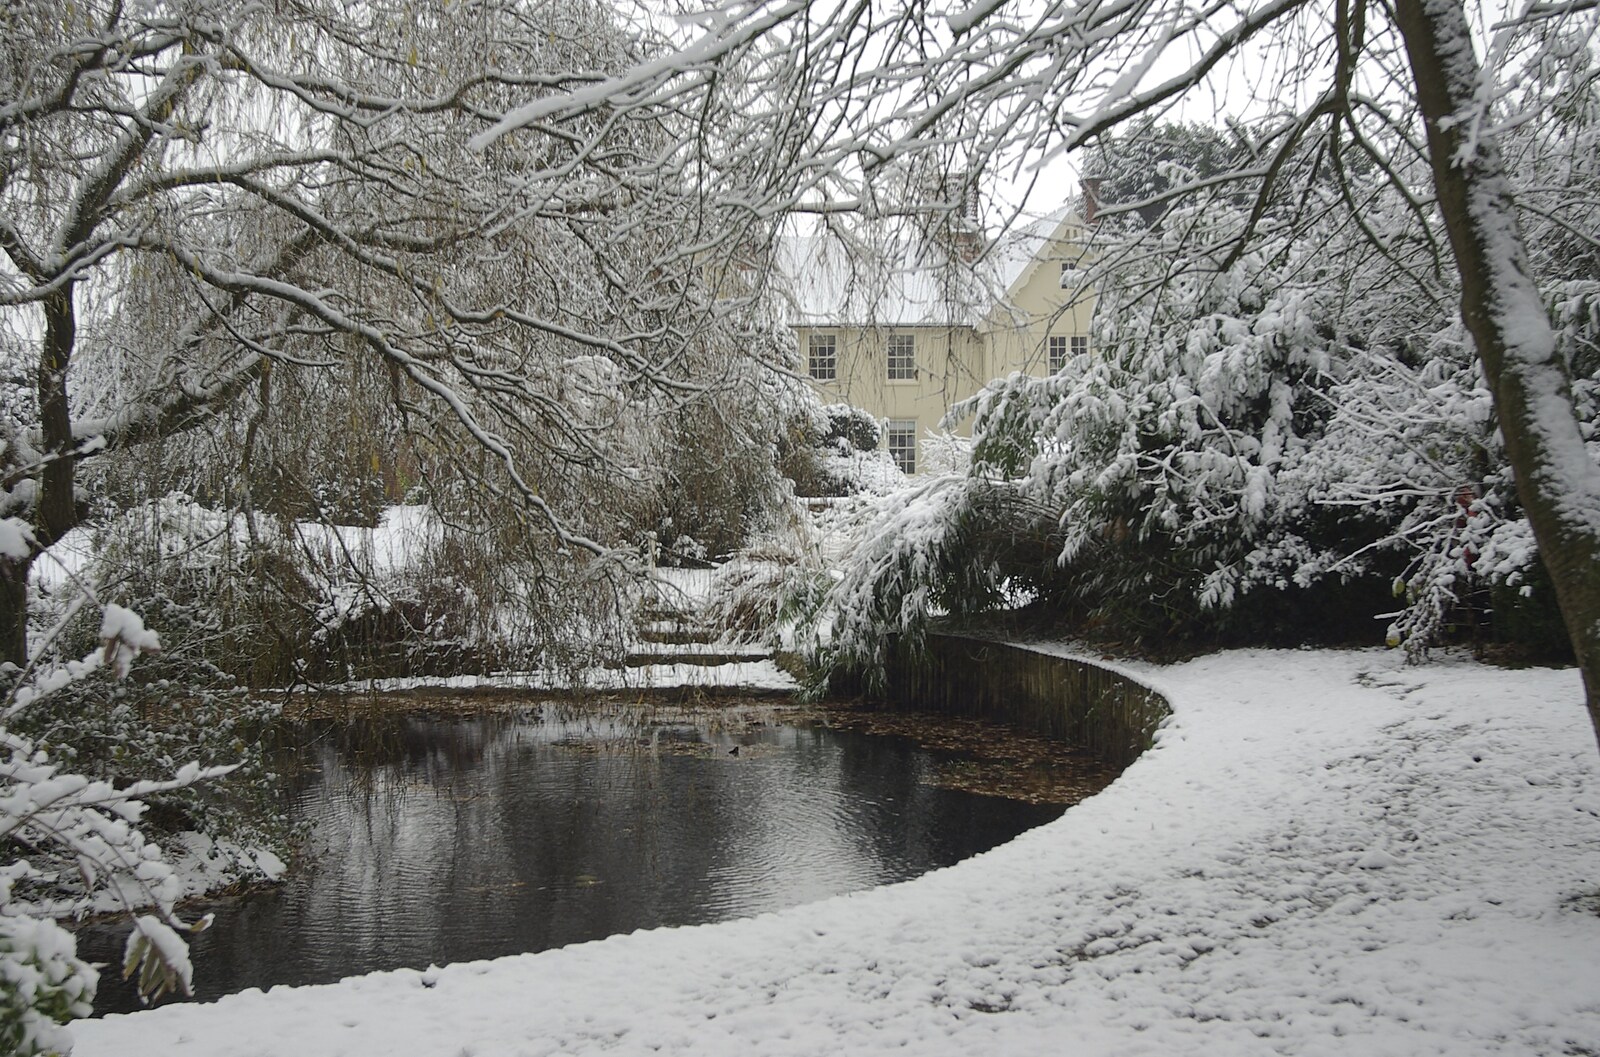 Snow Days, Brome, Suffolk - 22nd November 2008: A picturesque scene from the gardens of the Cornwallis Hotel